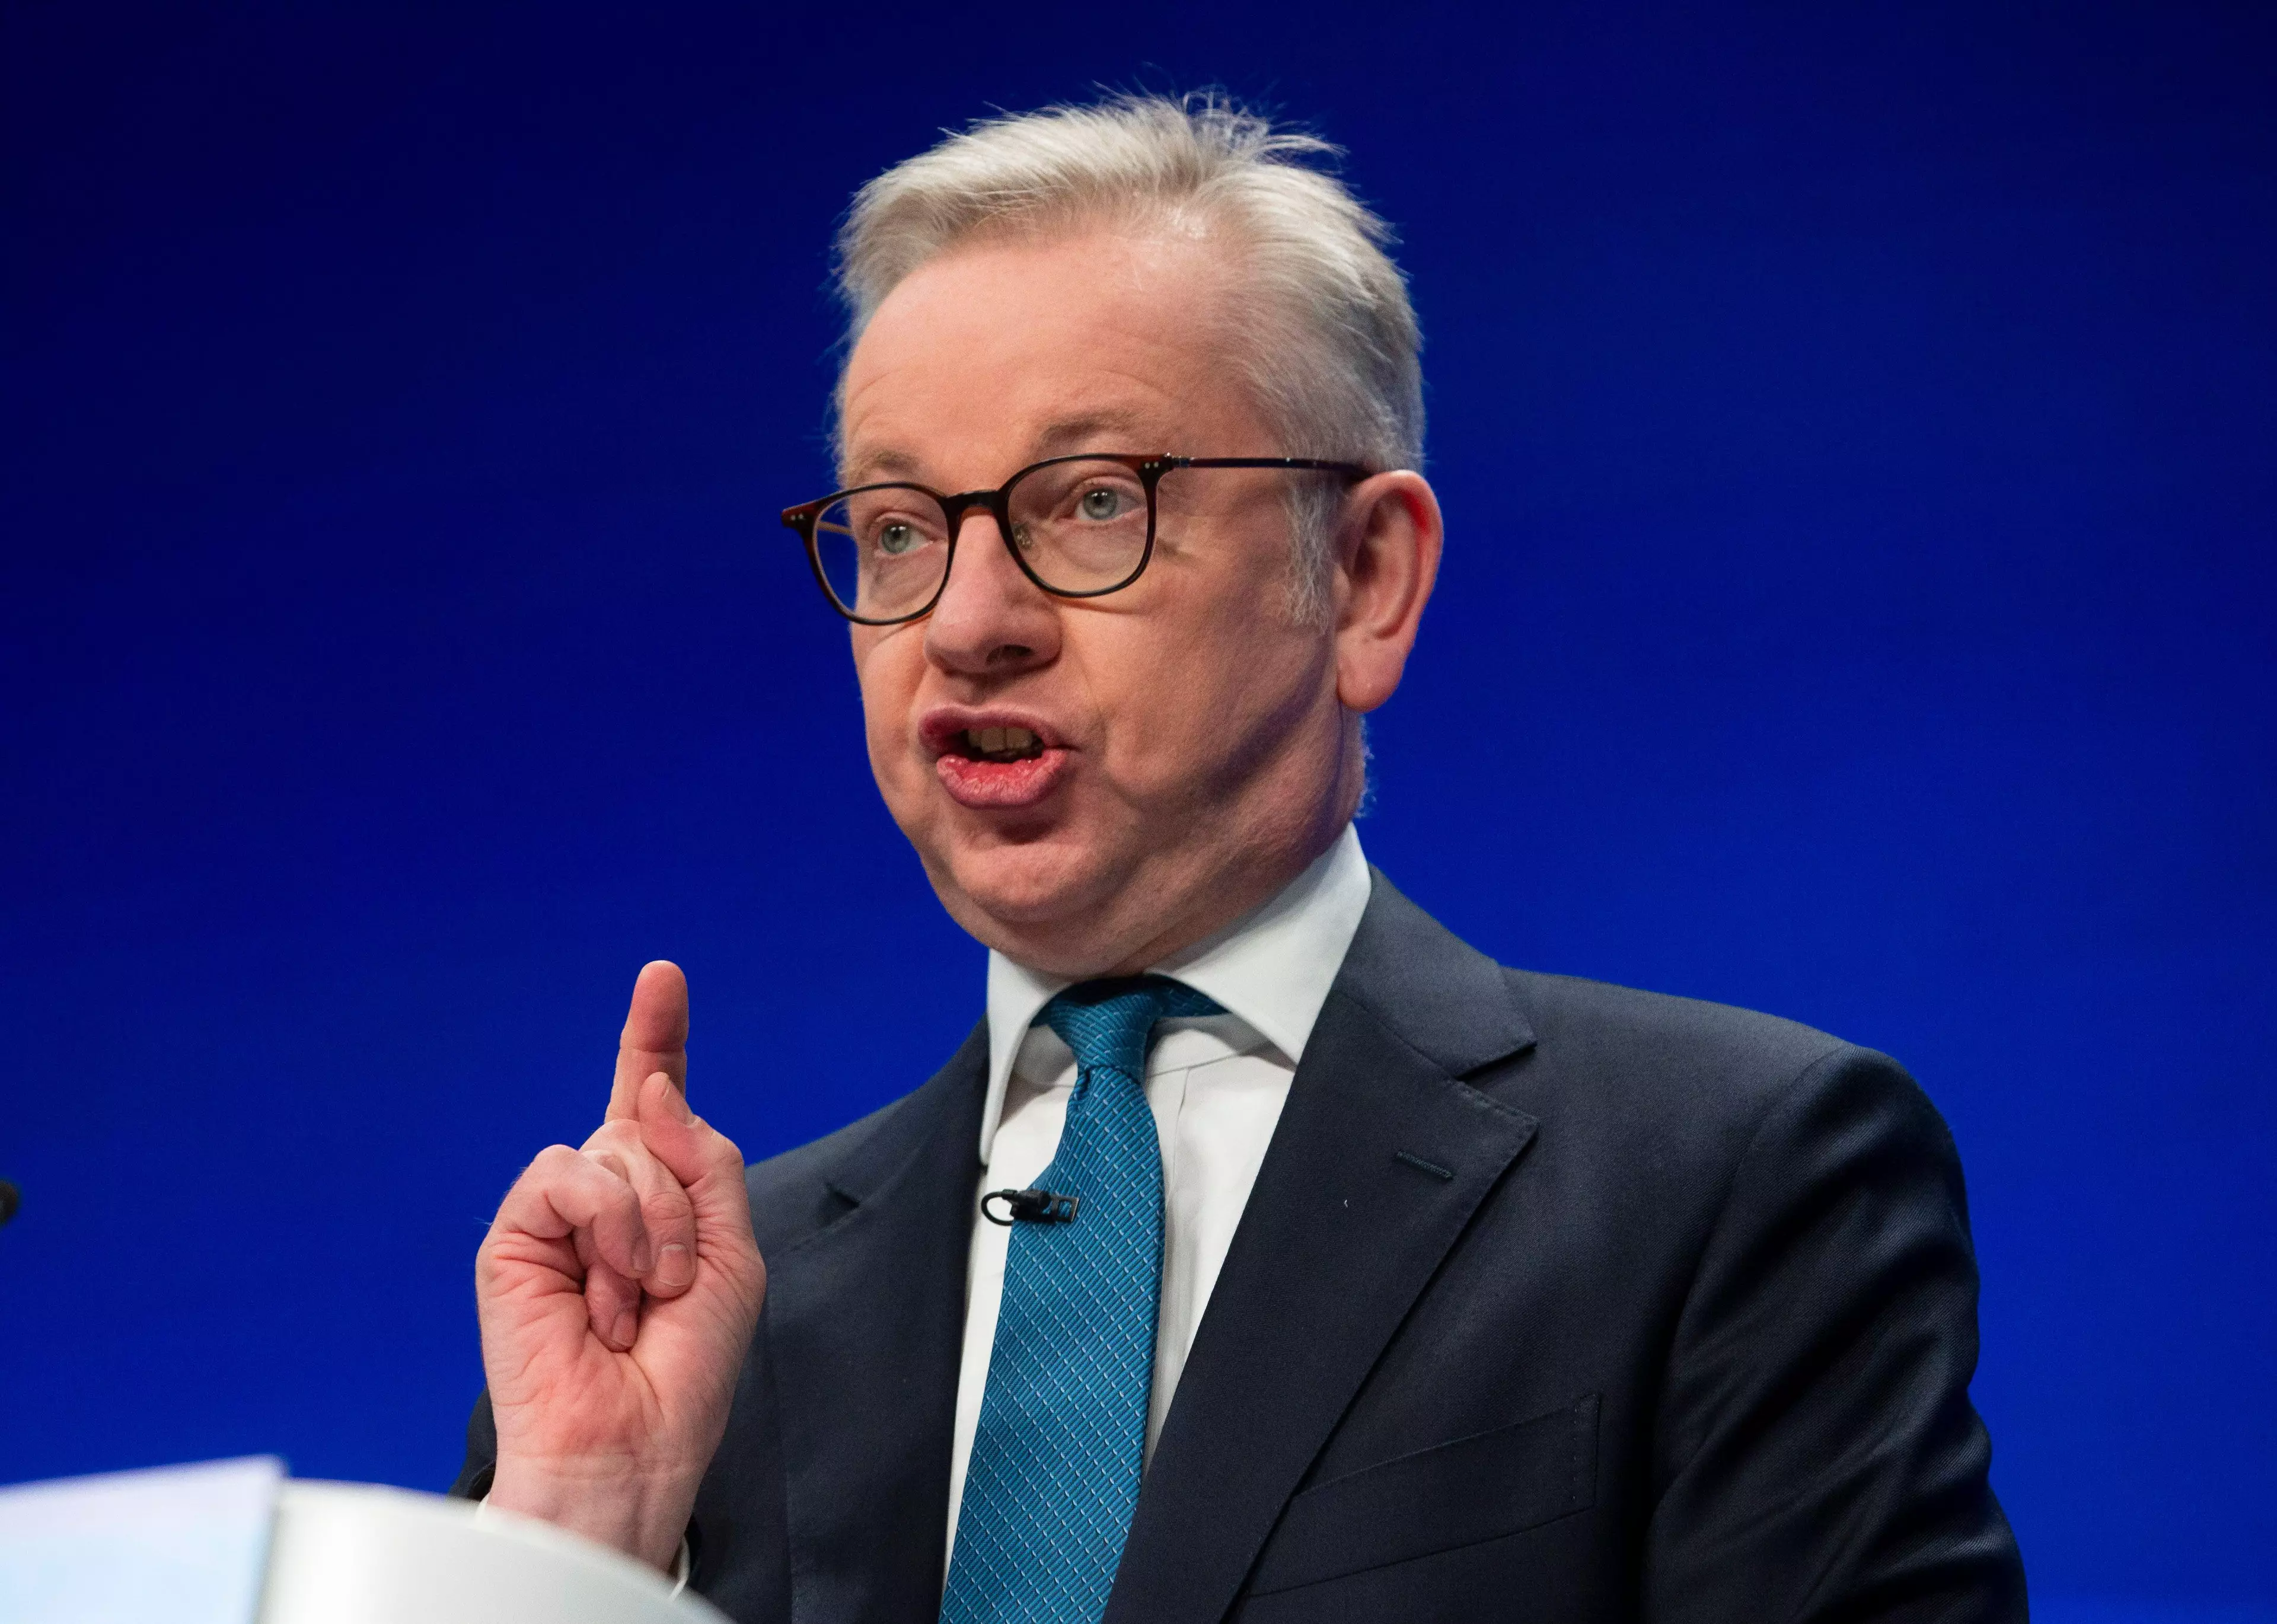 Gove delivering his conference speech.